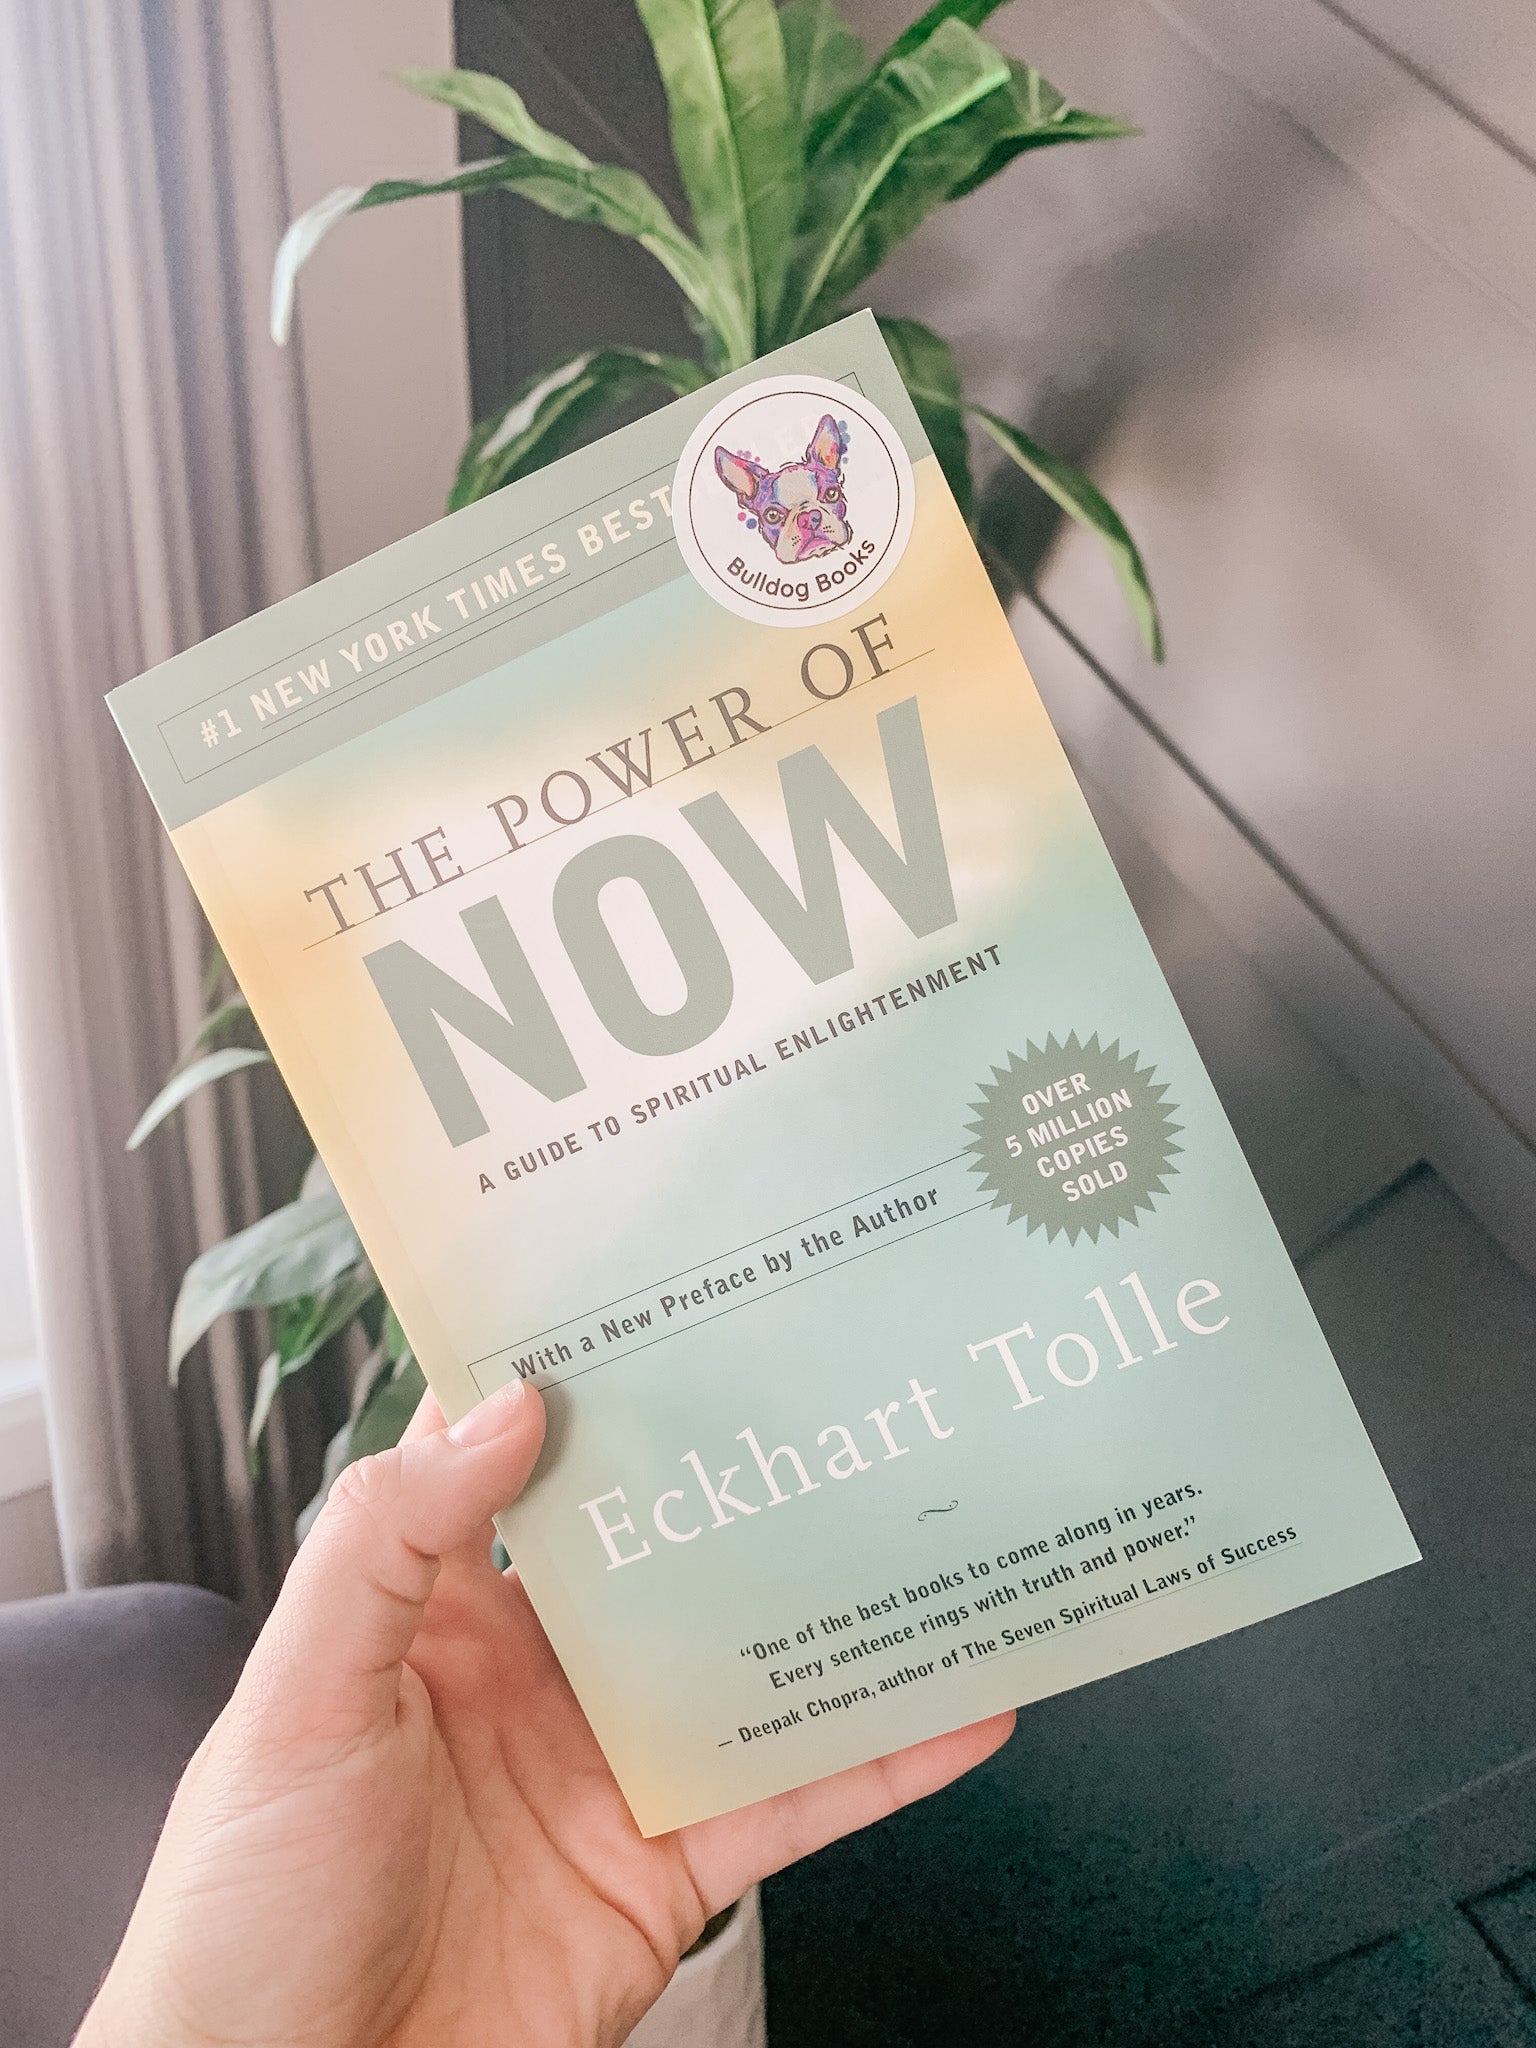 The Power of Now by Eckhart Tolle – Bulldog Books